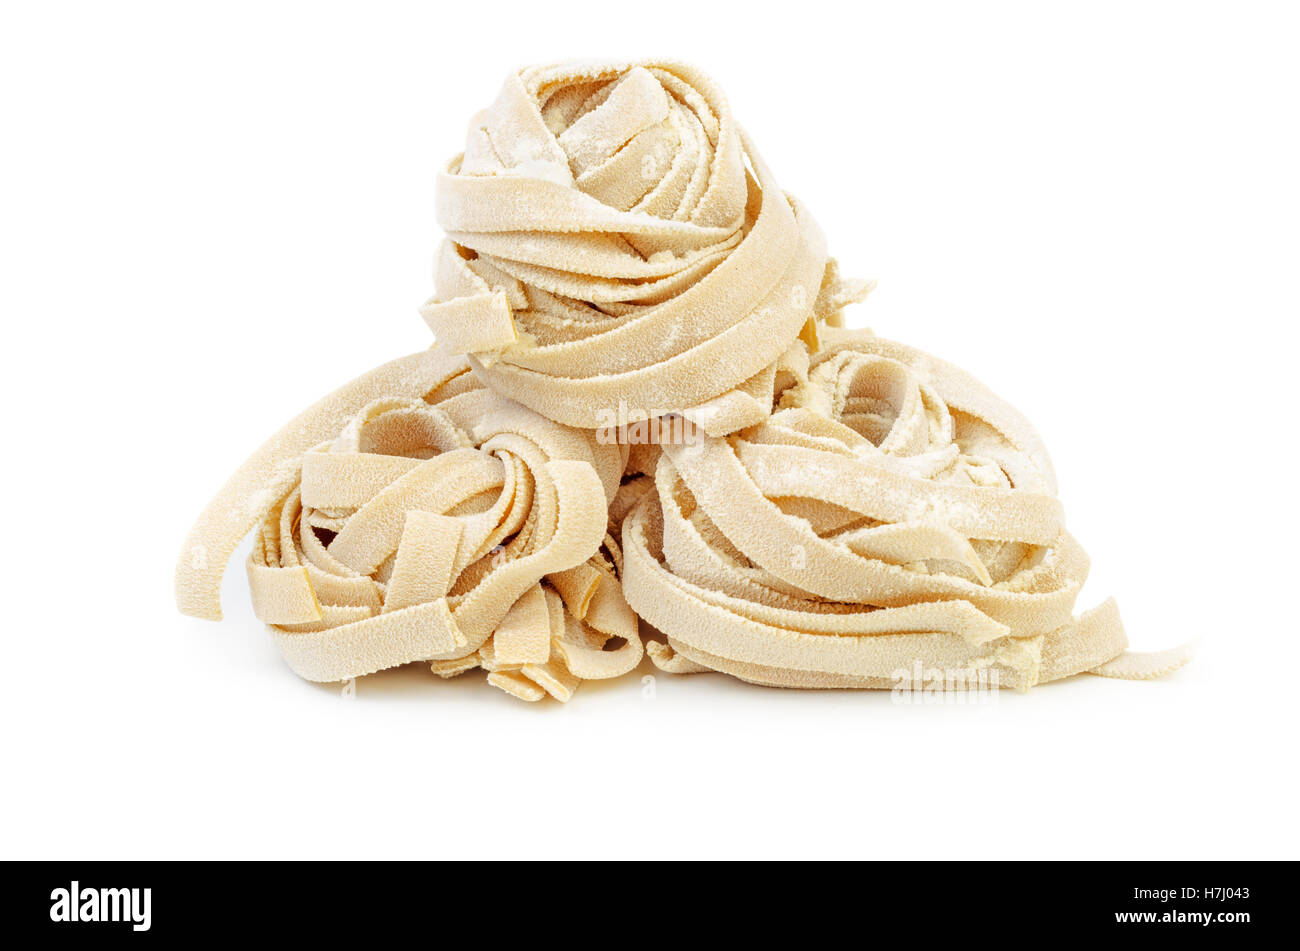 Pile of uncooked homemade rolled traditional italian pasta. Portion of raw fettuccine or tagliatelle or pappardelle. Dry pasta Stock Photo